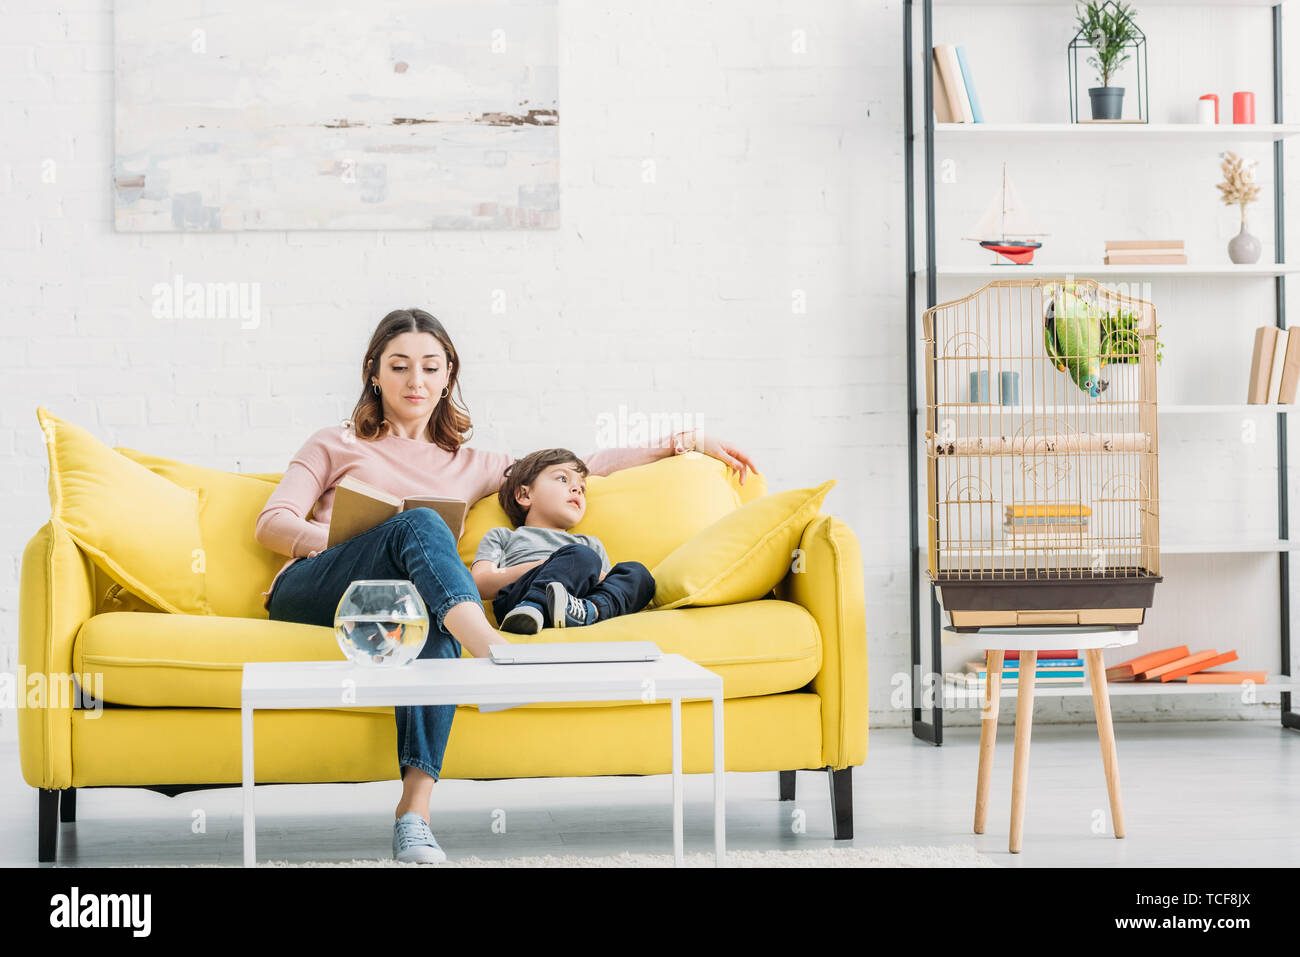 attractive woman with adorable son resting on yellow sofa in spacious living room Stock Photo